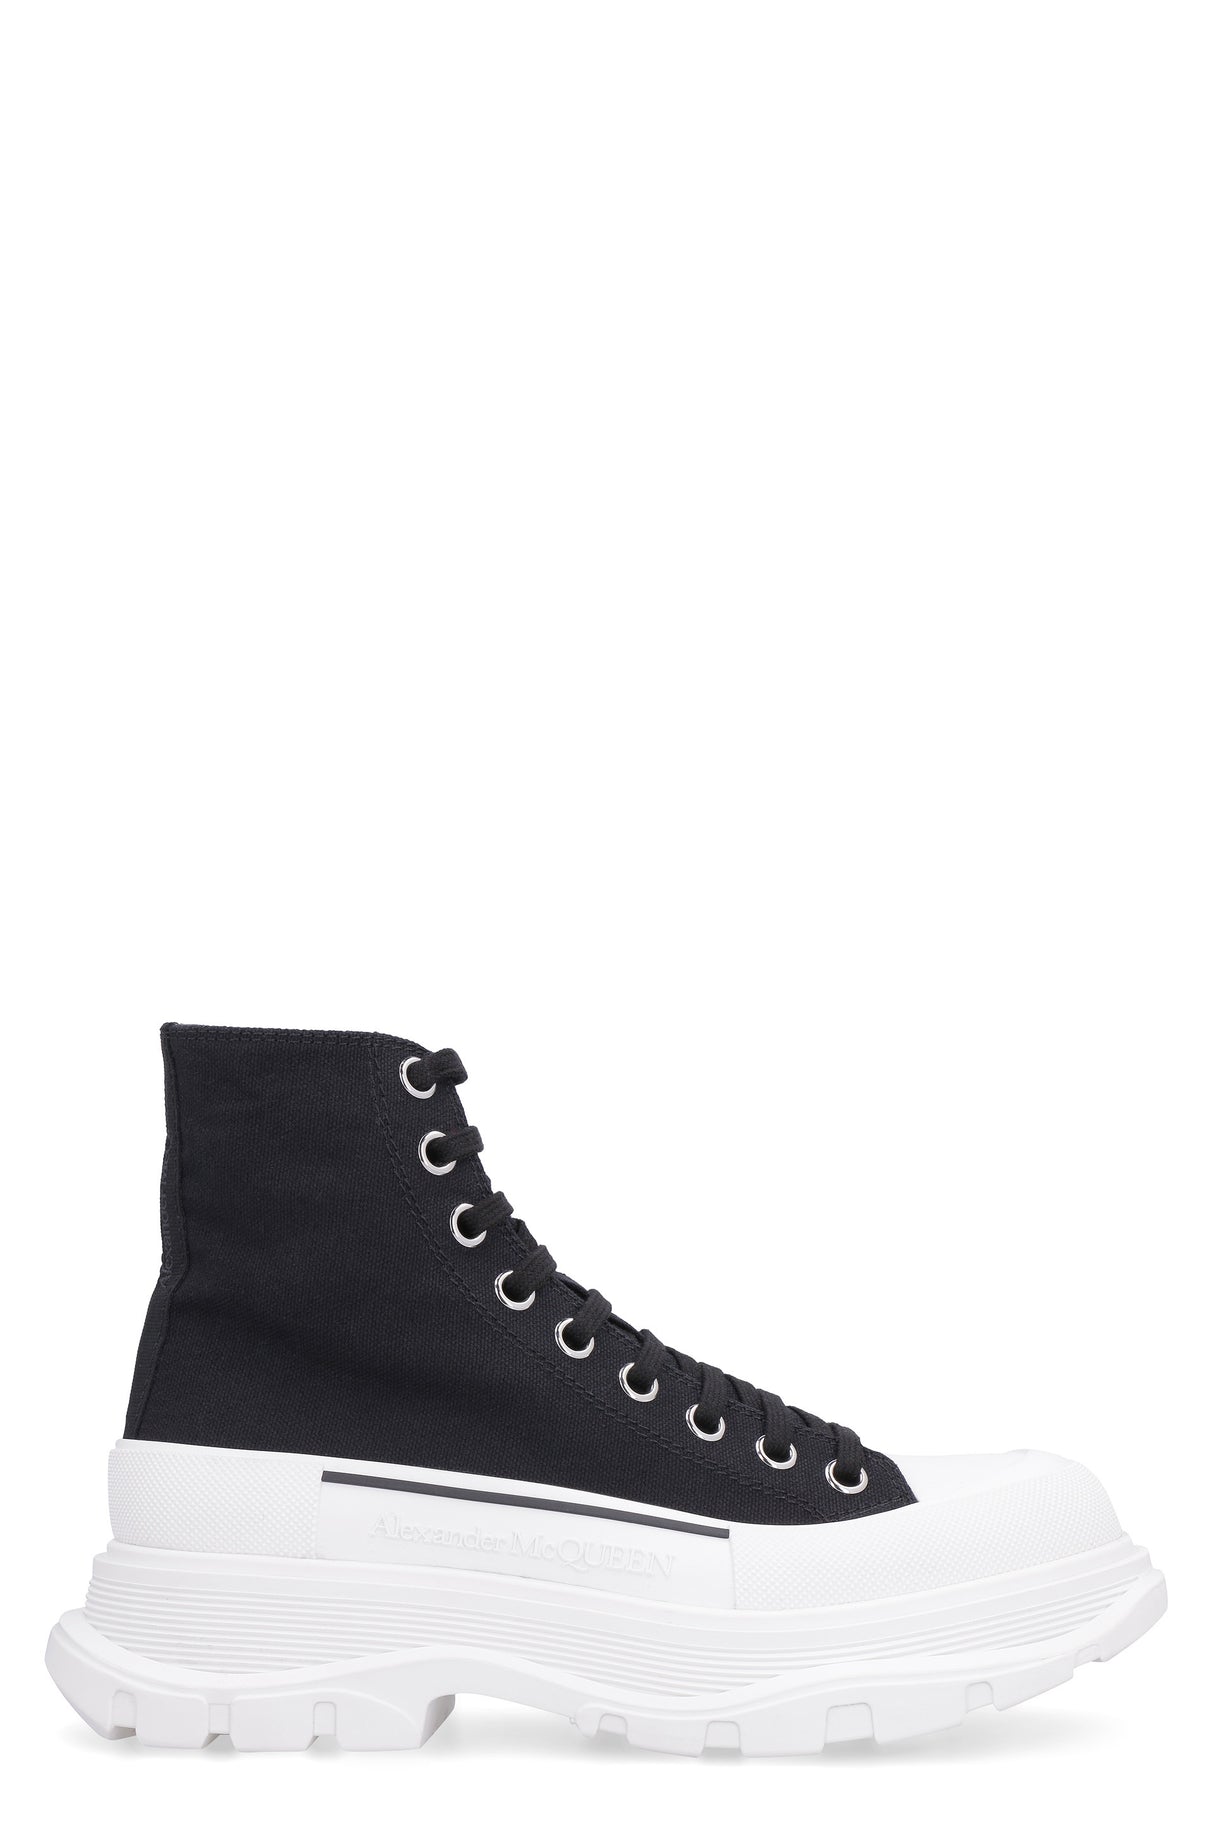 ALEXANDER MCQUEEN Canvas Ankle Boots for Men - Textured Rubber and Branded Grosgrain Detailing